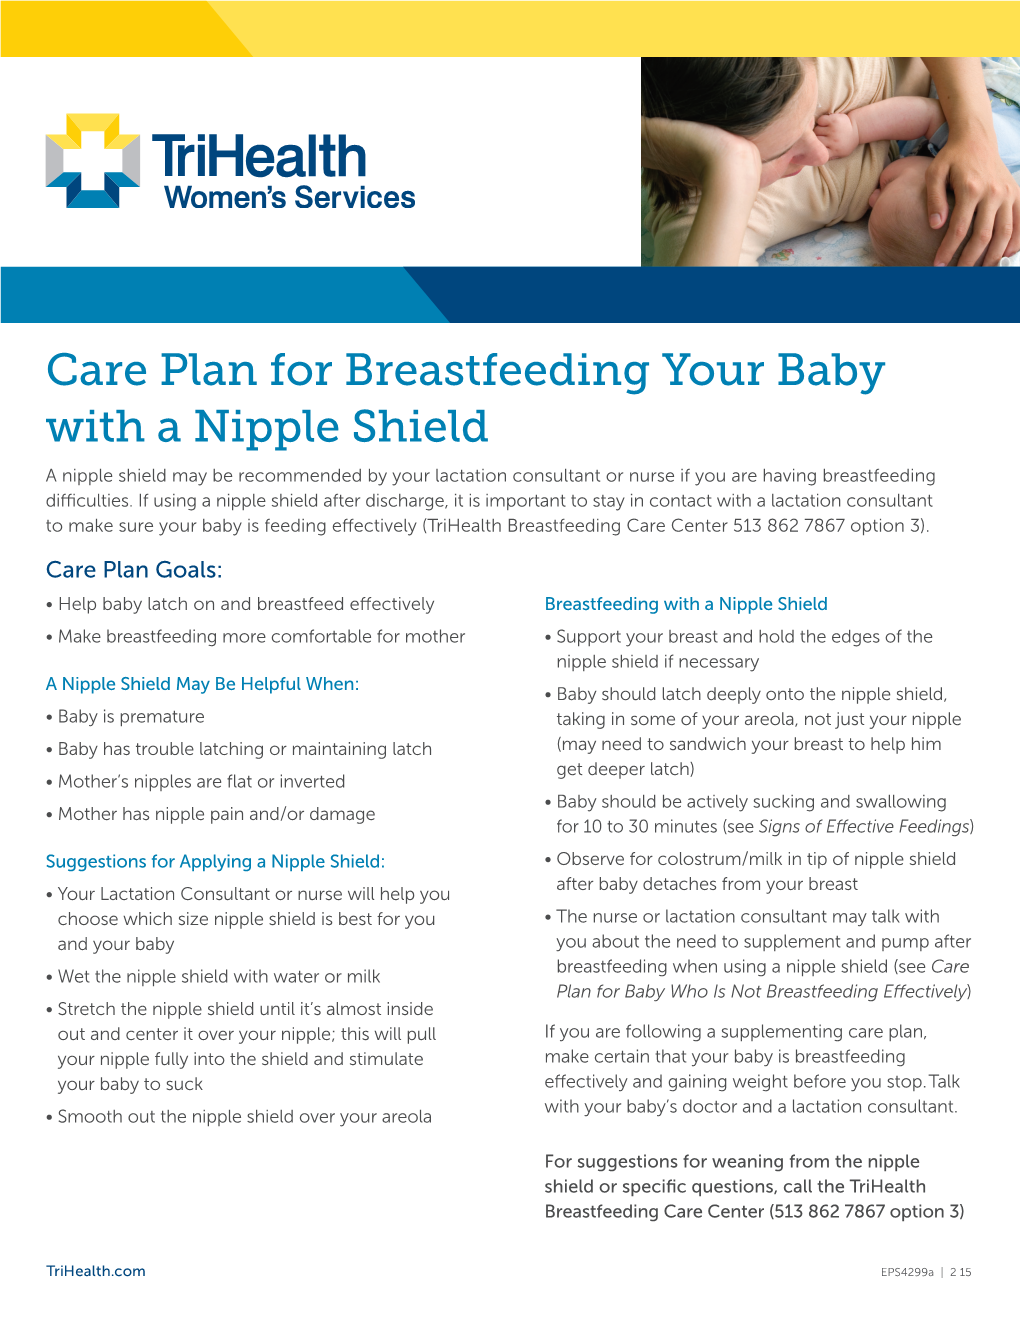 Care Plan for Breastfeeding Your Baby with a Nipple Shield